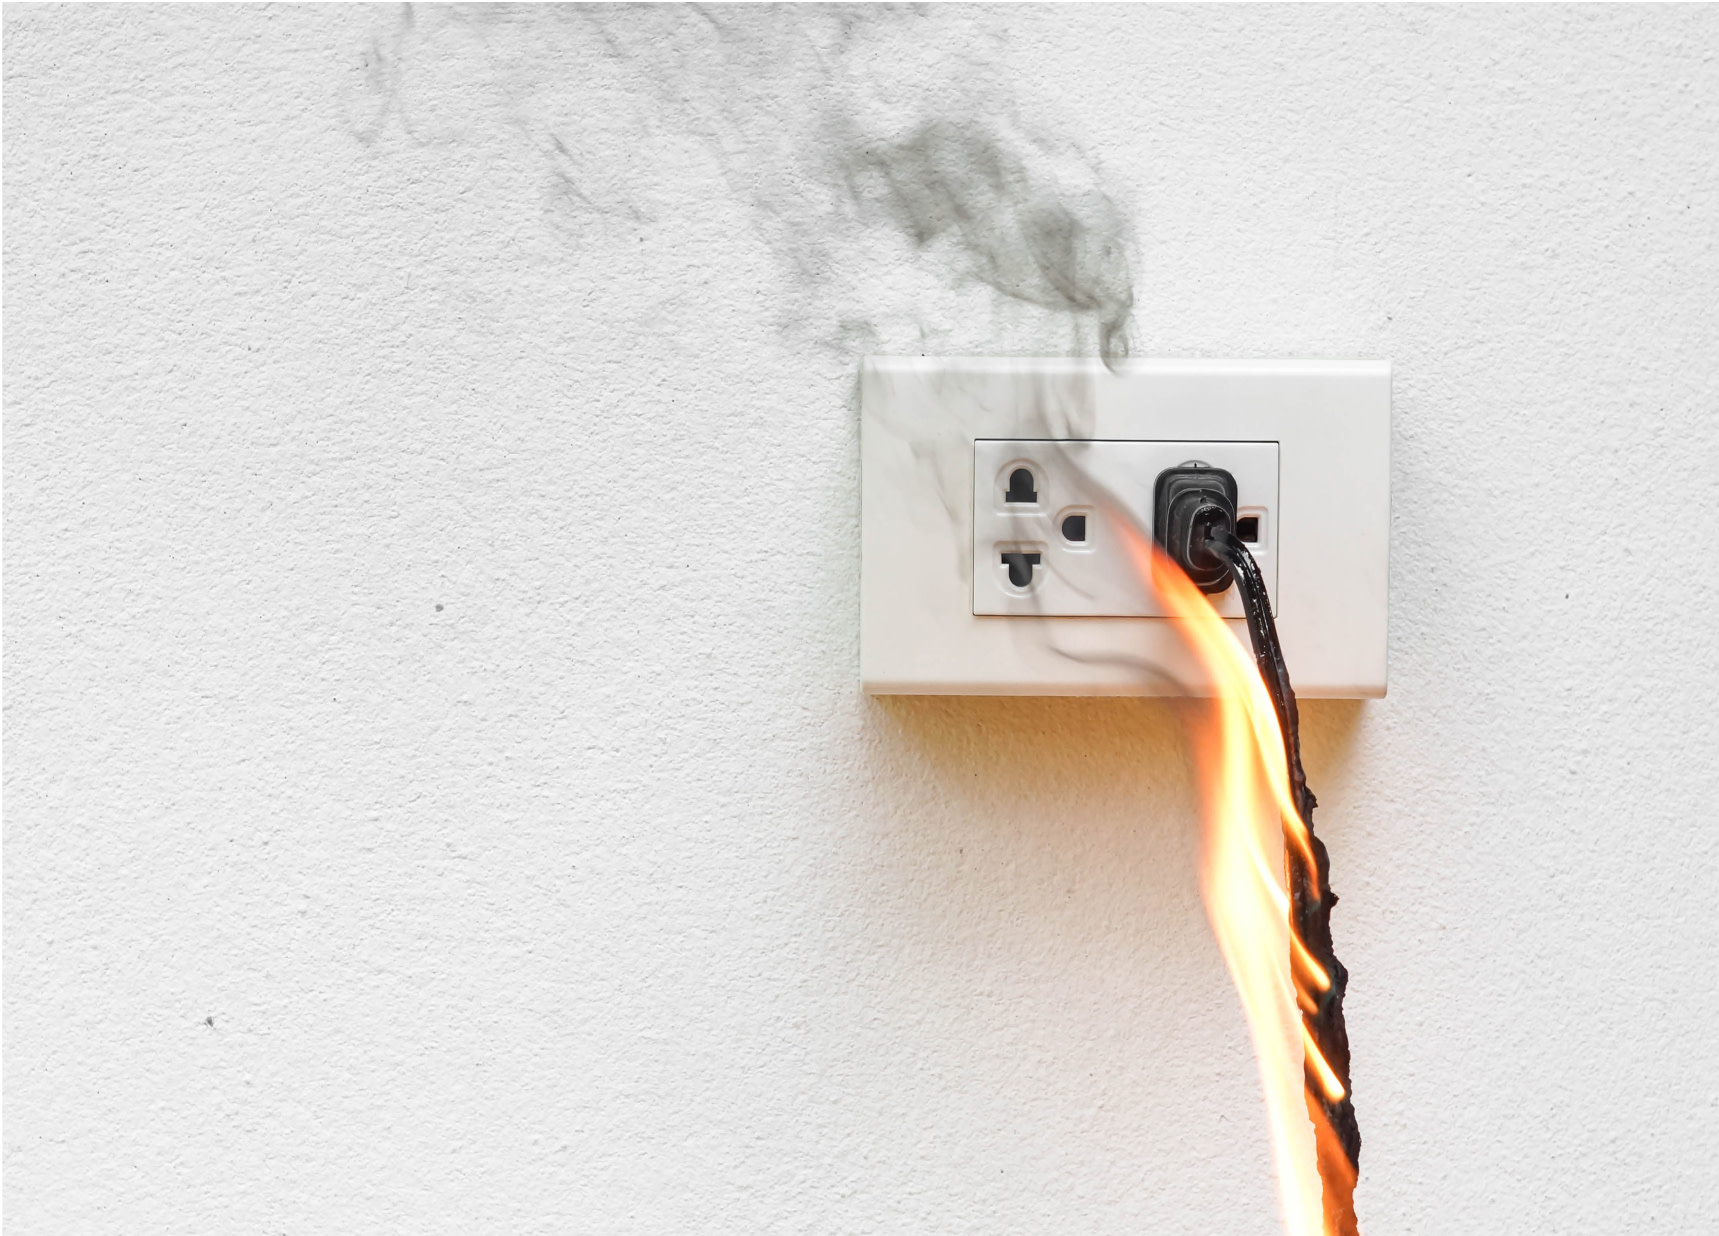 An outlet is on fire. Your homeowners quote includes coverage to protect your home in events like this.